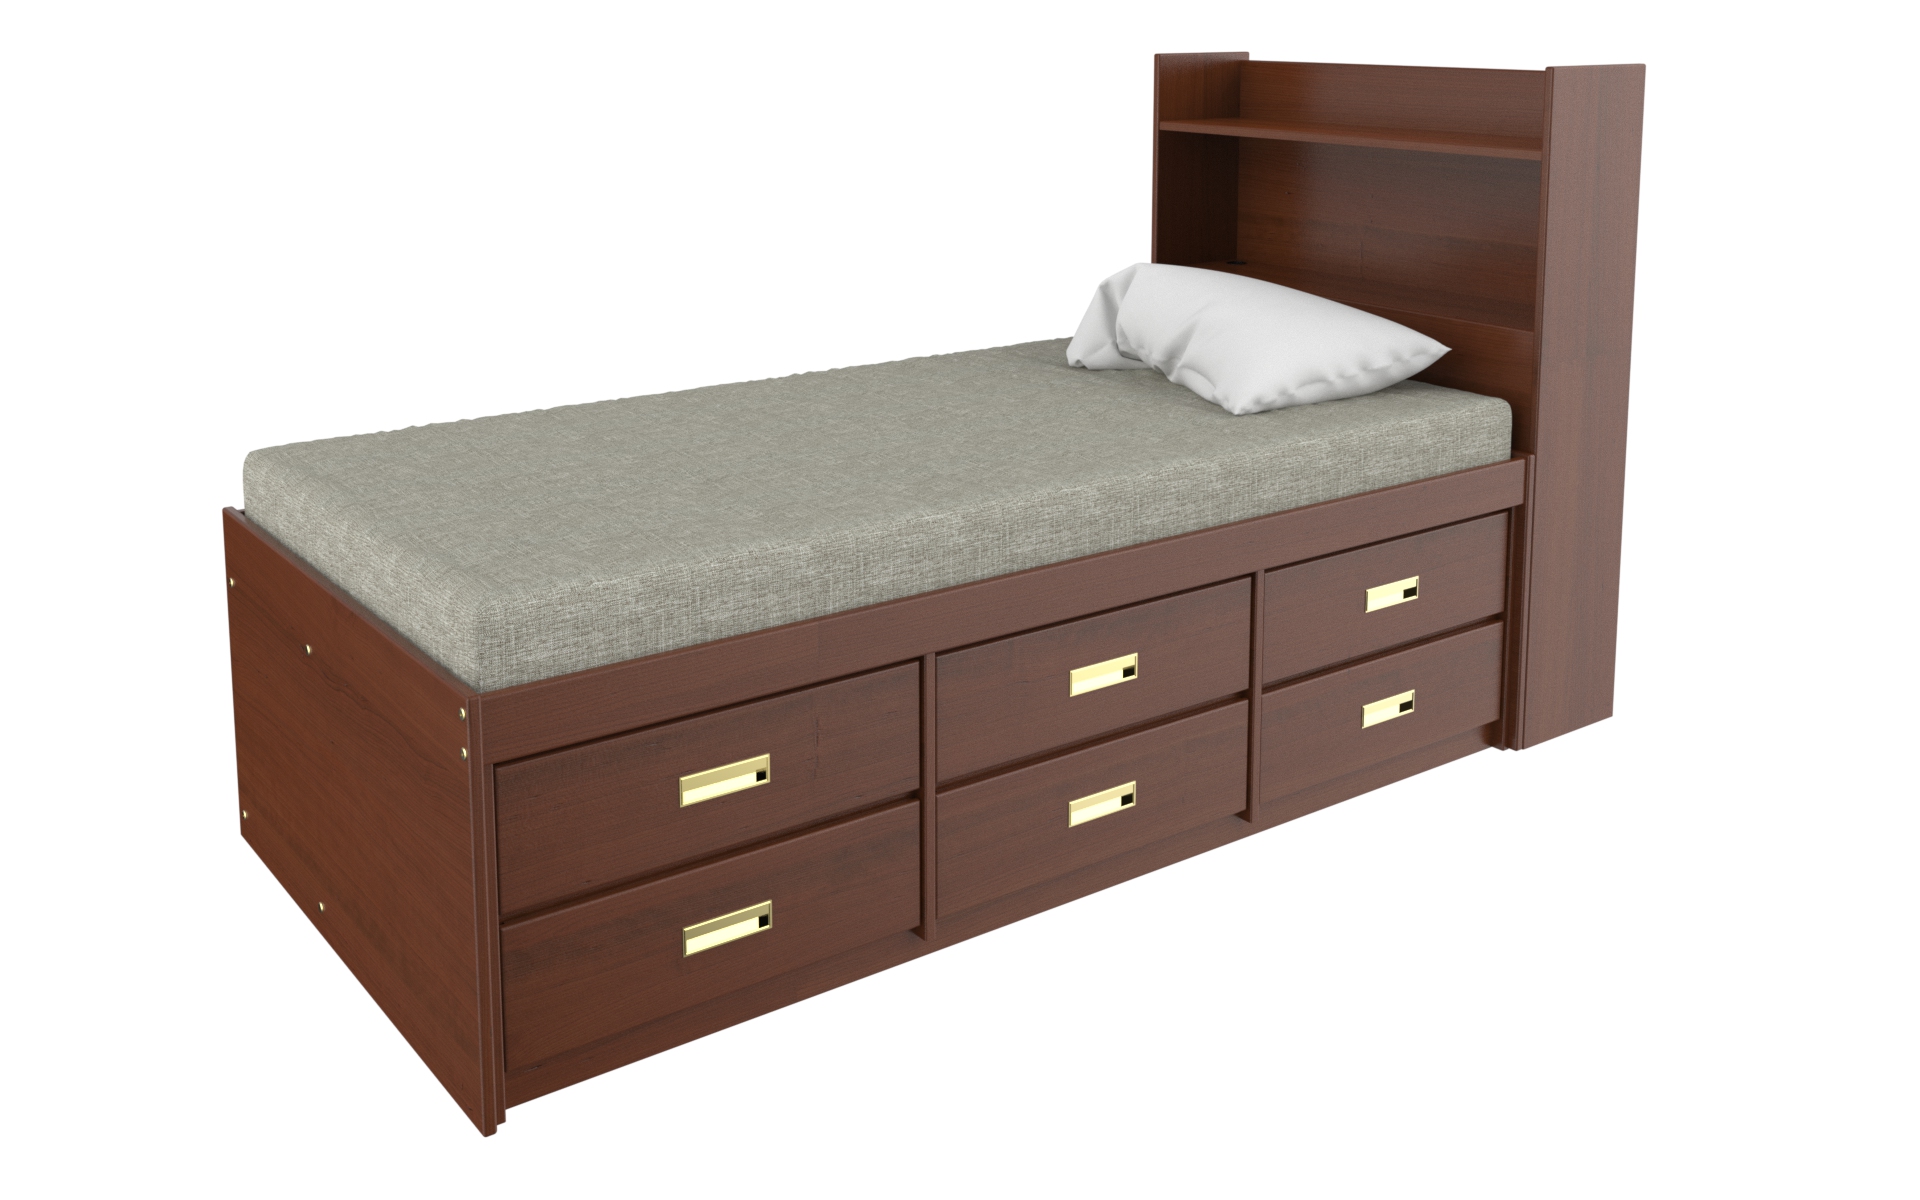 CAPTAINS BED.953.jpg